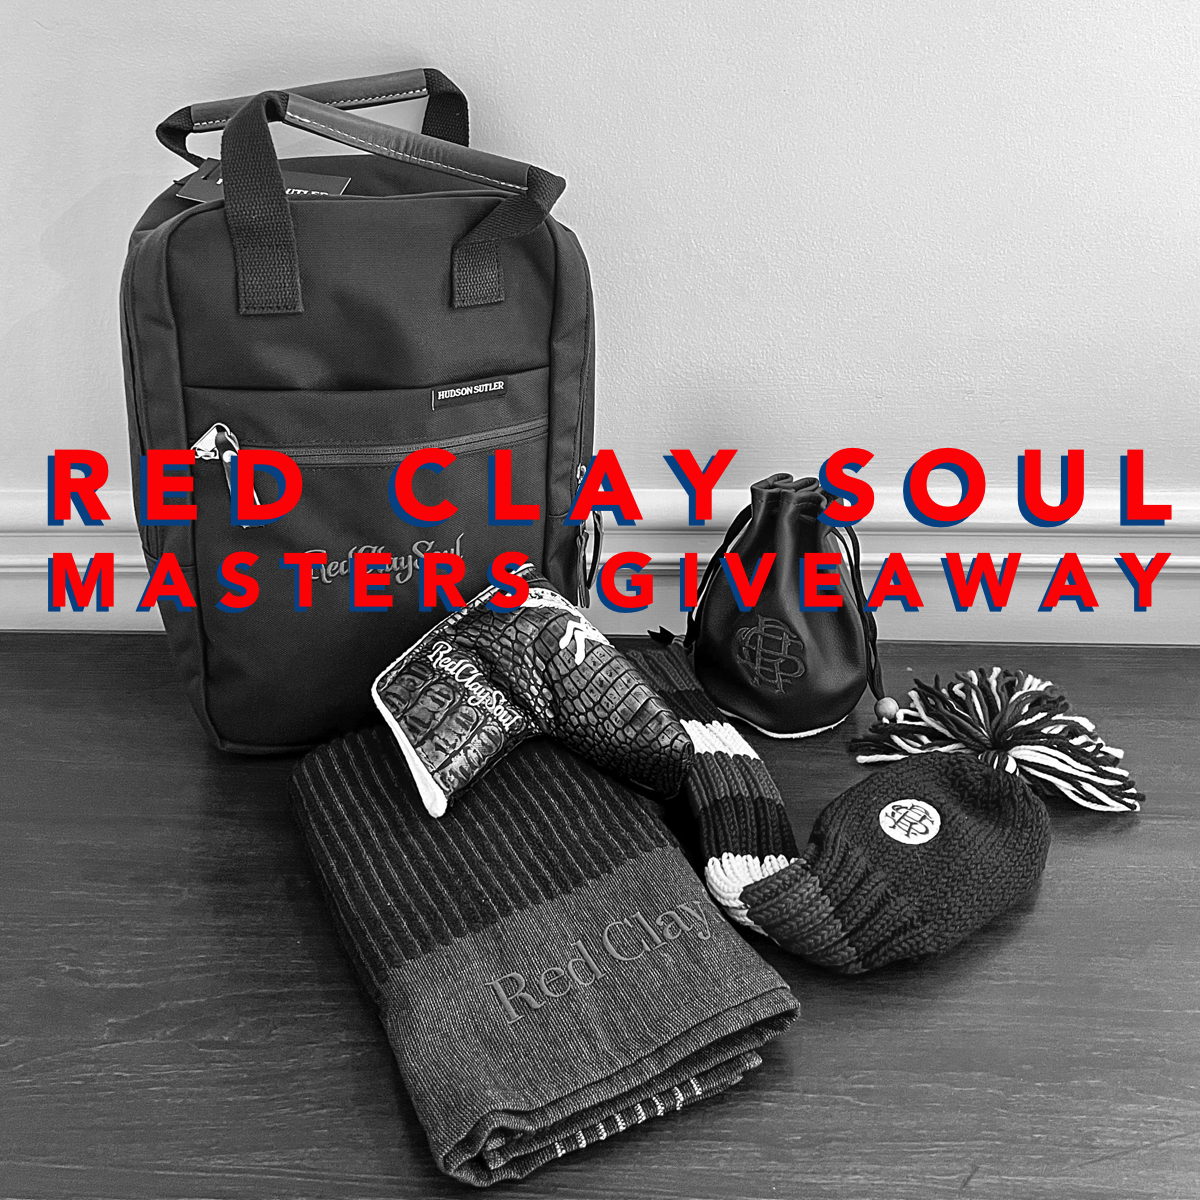 Red Clay Soul Masters Giveaway